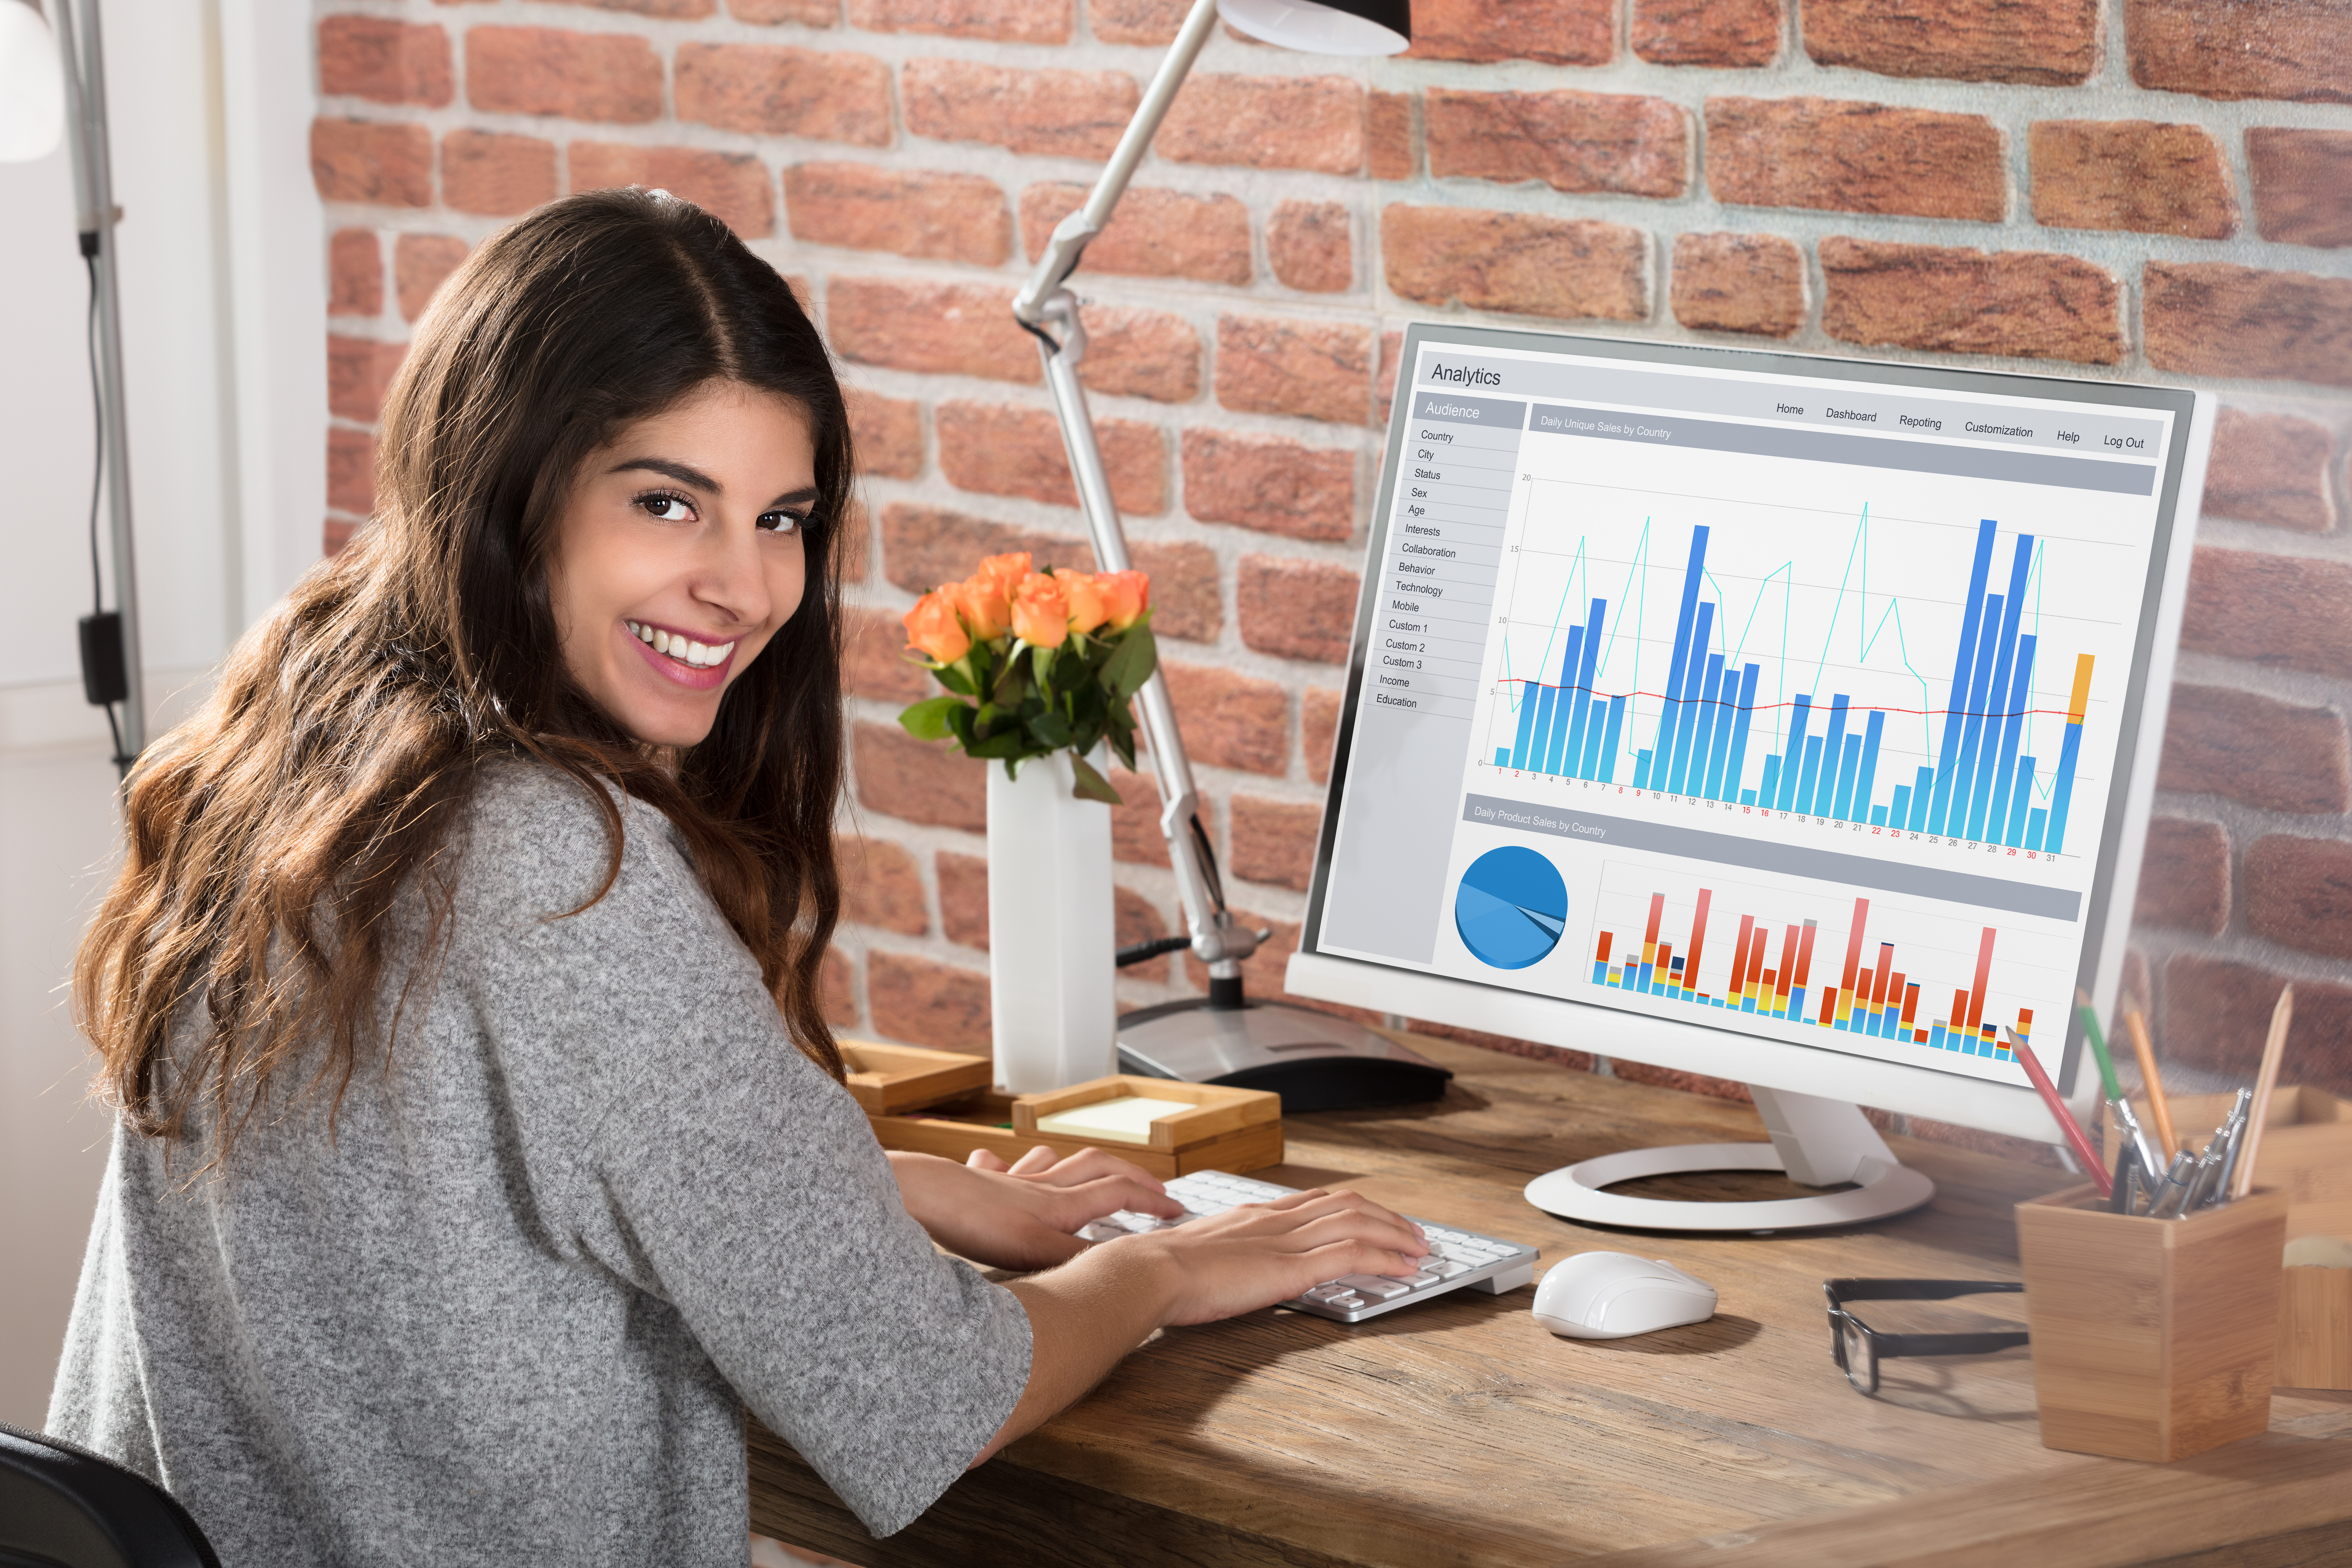 young professional woman seated at a desk in front of a monitor displaying graphs, she is turned towards the camera and smiling